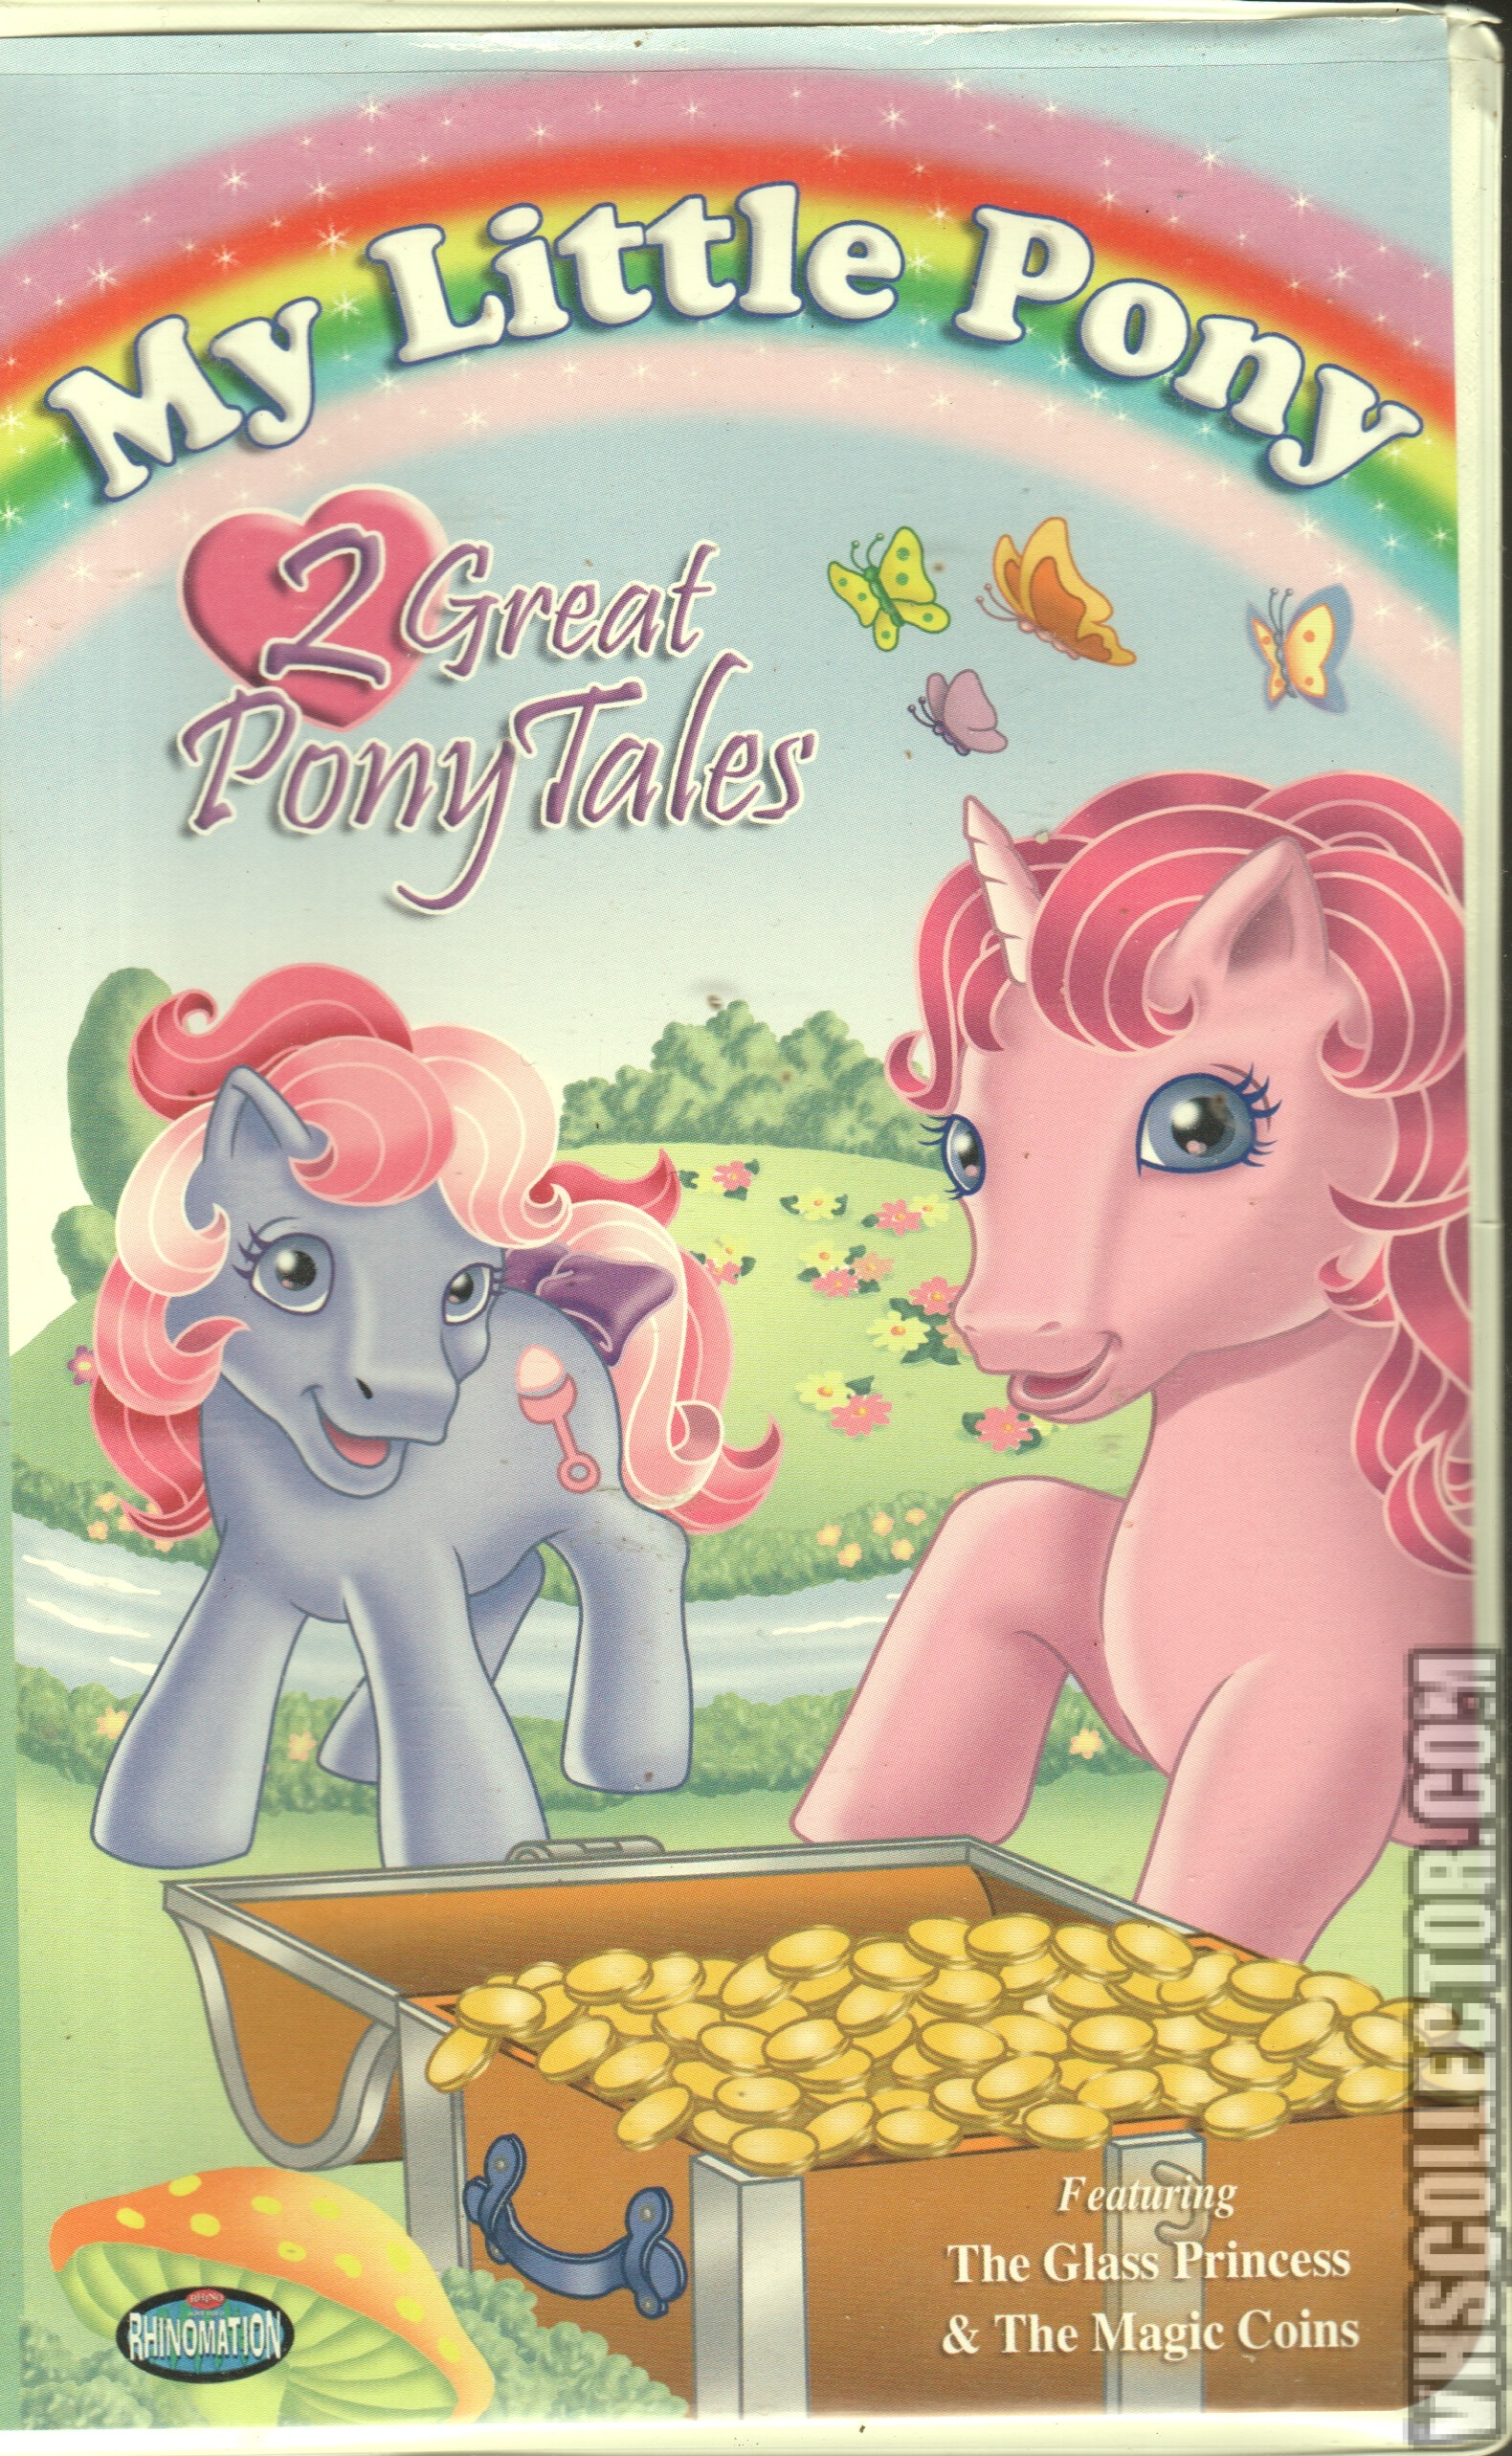 My Little Pony: 2 Great Pony Tales | VHSCollector.com